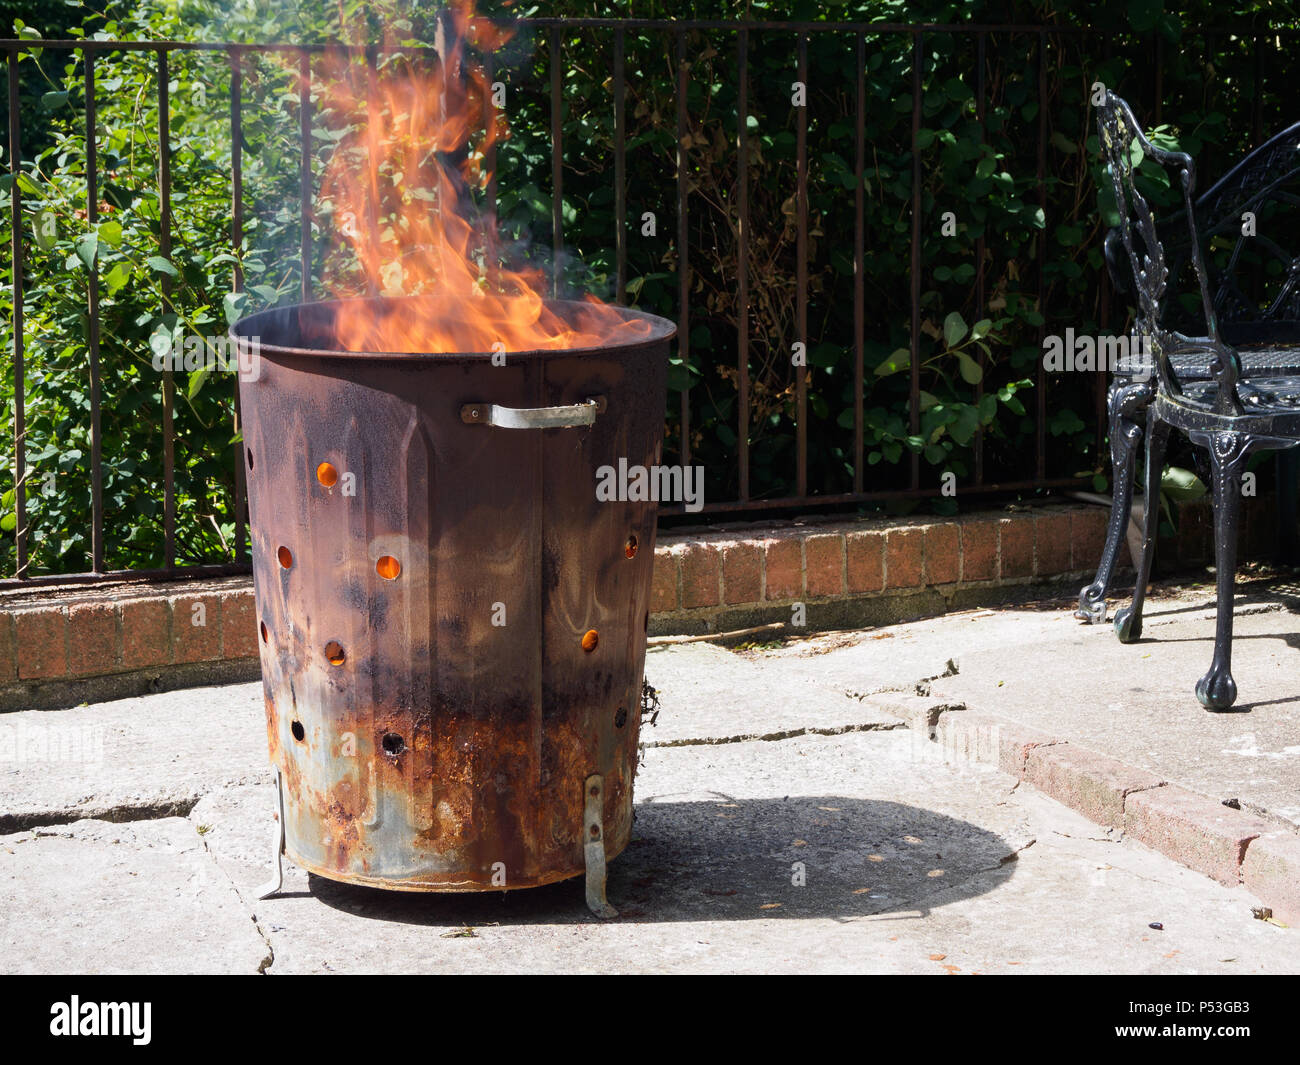 https://c8.alamy.com/comp/P53GB3/destruction-of-garbage-by-means-of-burning-in-a-garden-incinerator-bin-cause-smoke-which-air-pollution-not-helping-the-environment-P53GB3.jpg